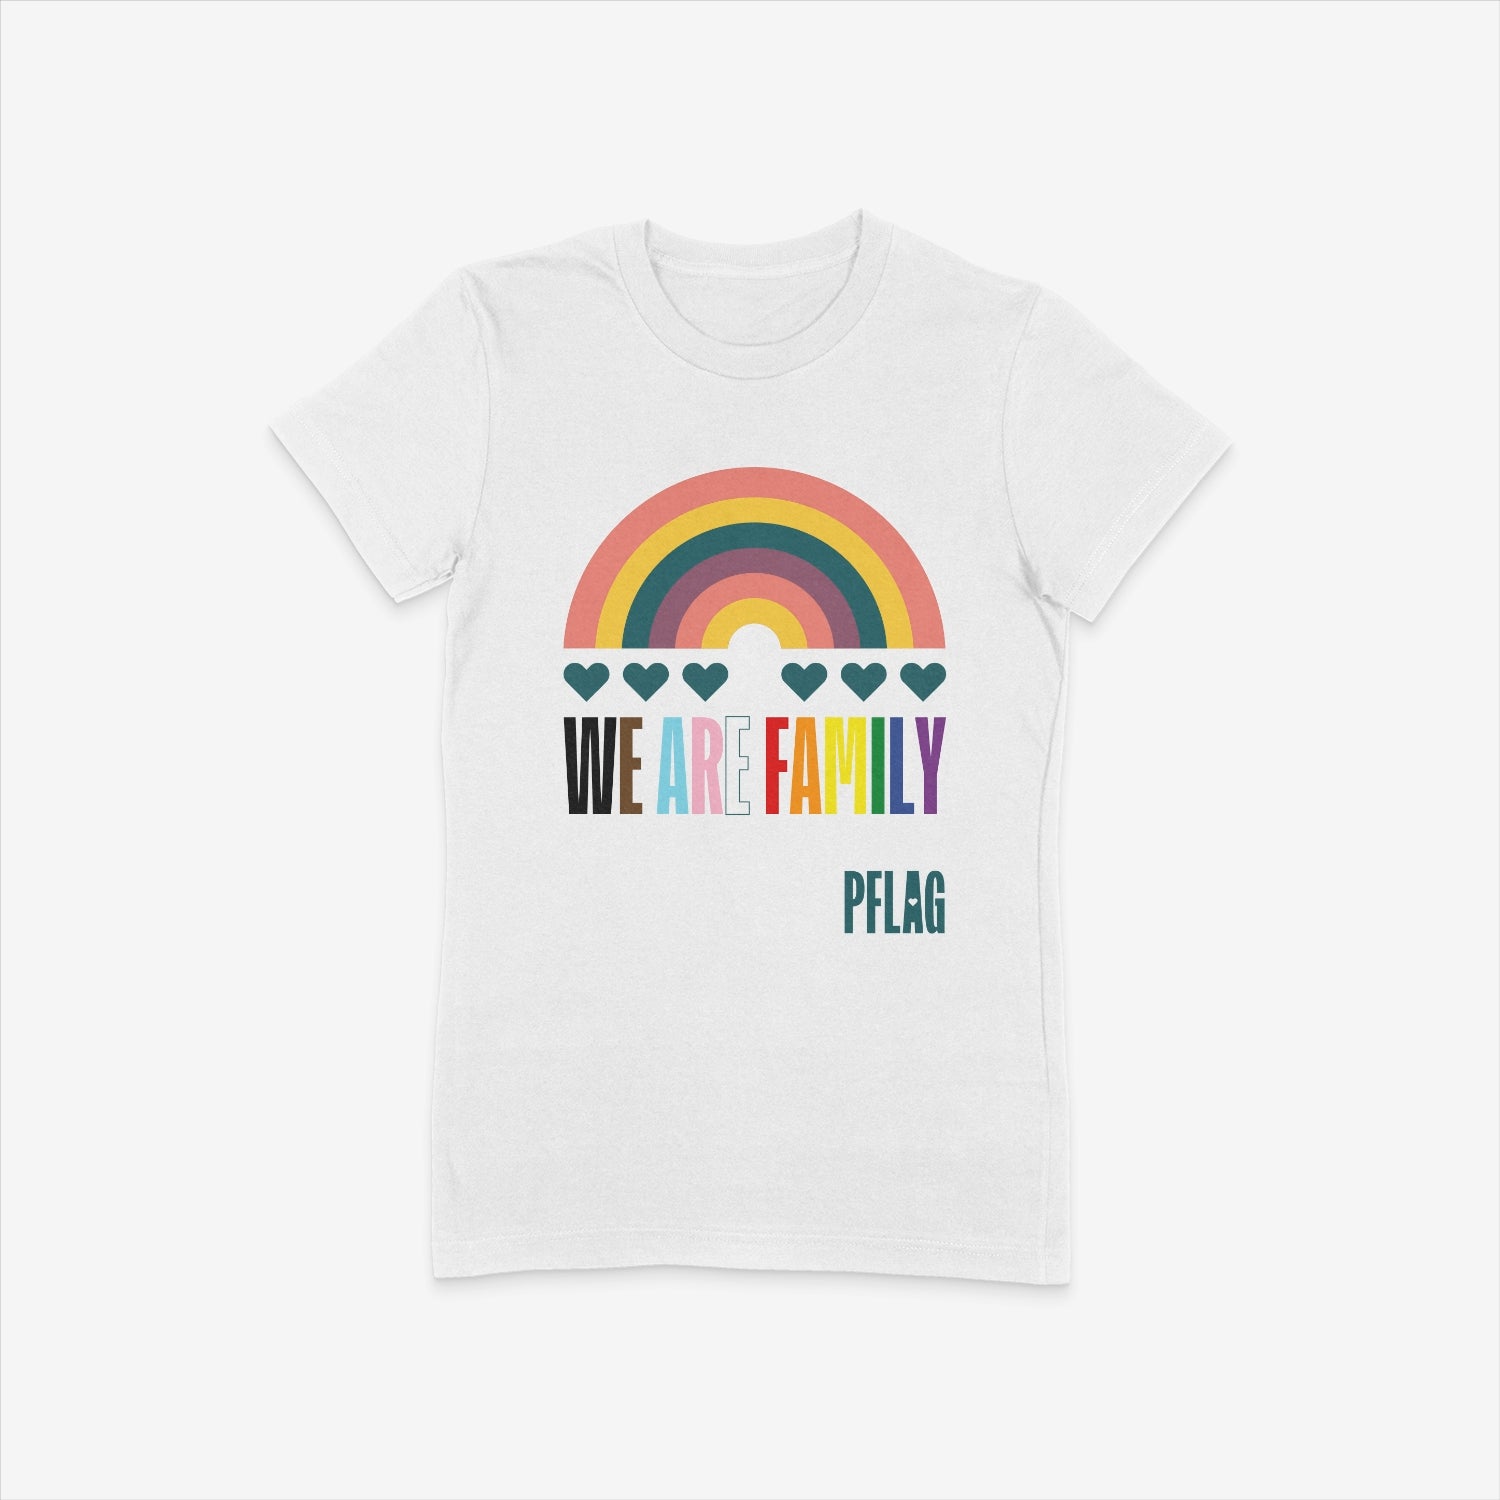 We Are Family - Fitted-Cut Crewneck Short Sleeve T-Shirt